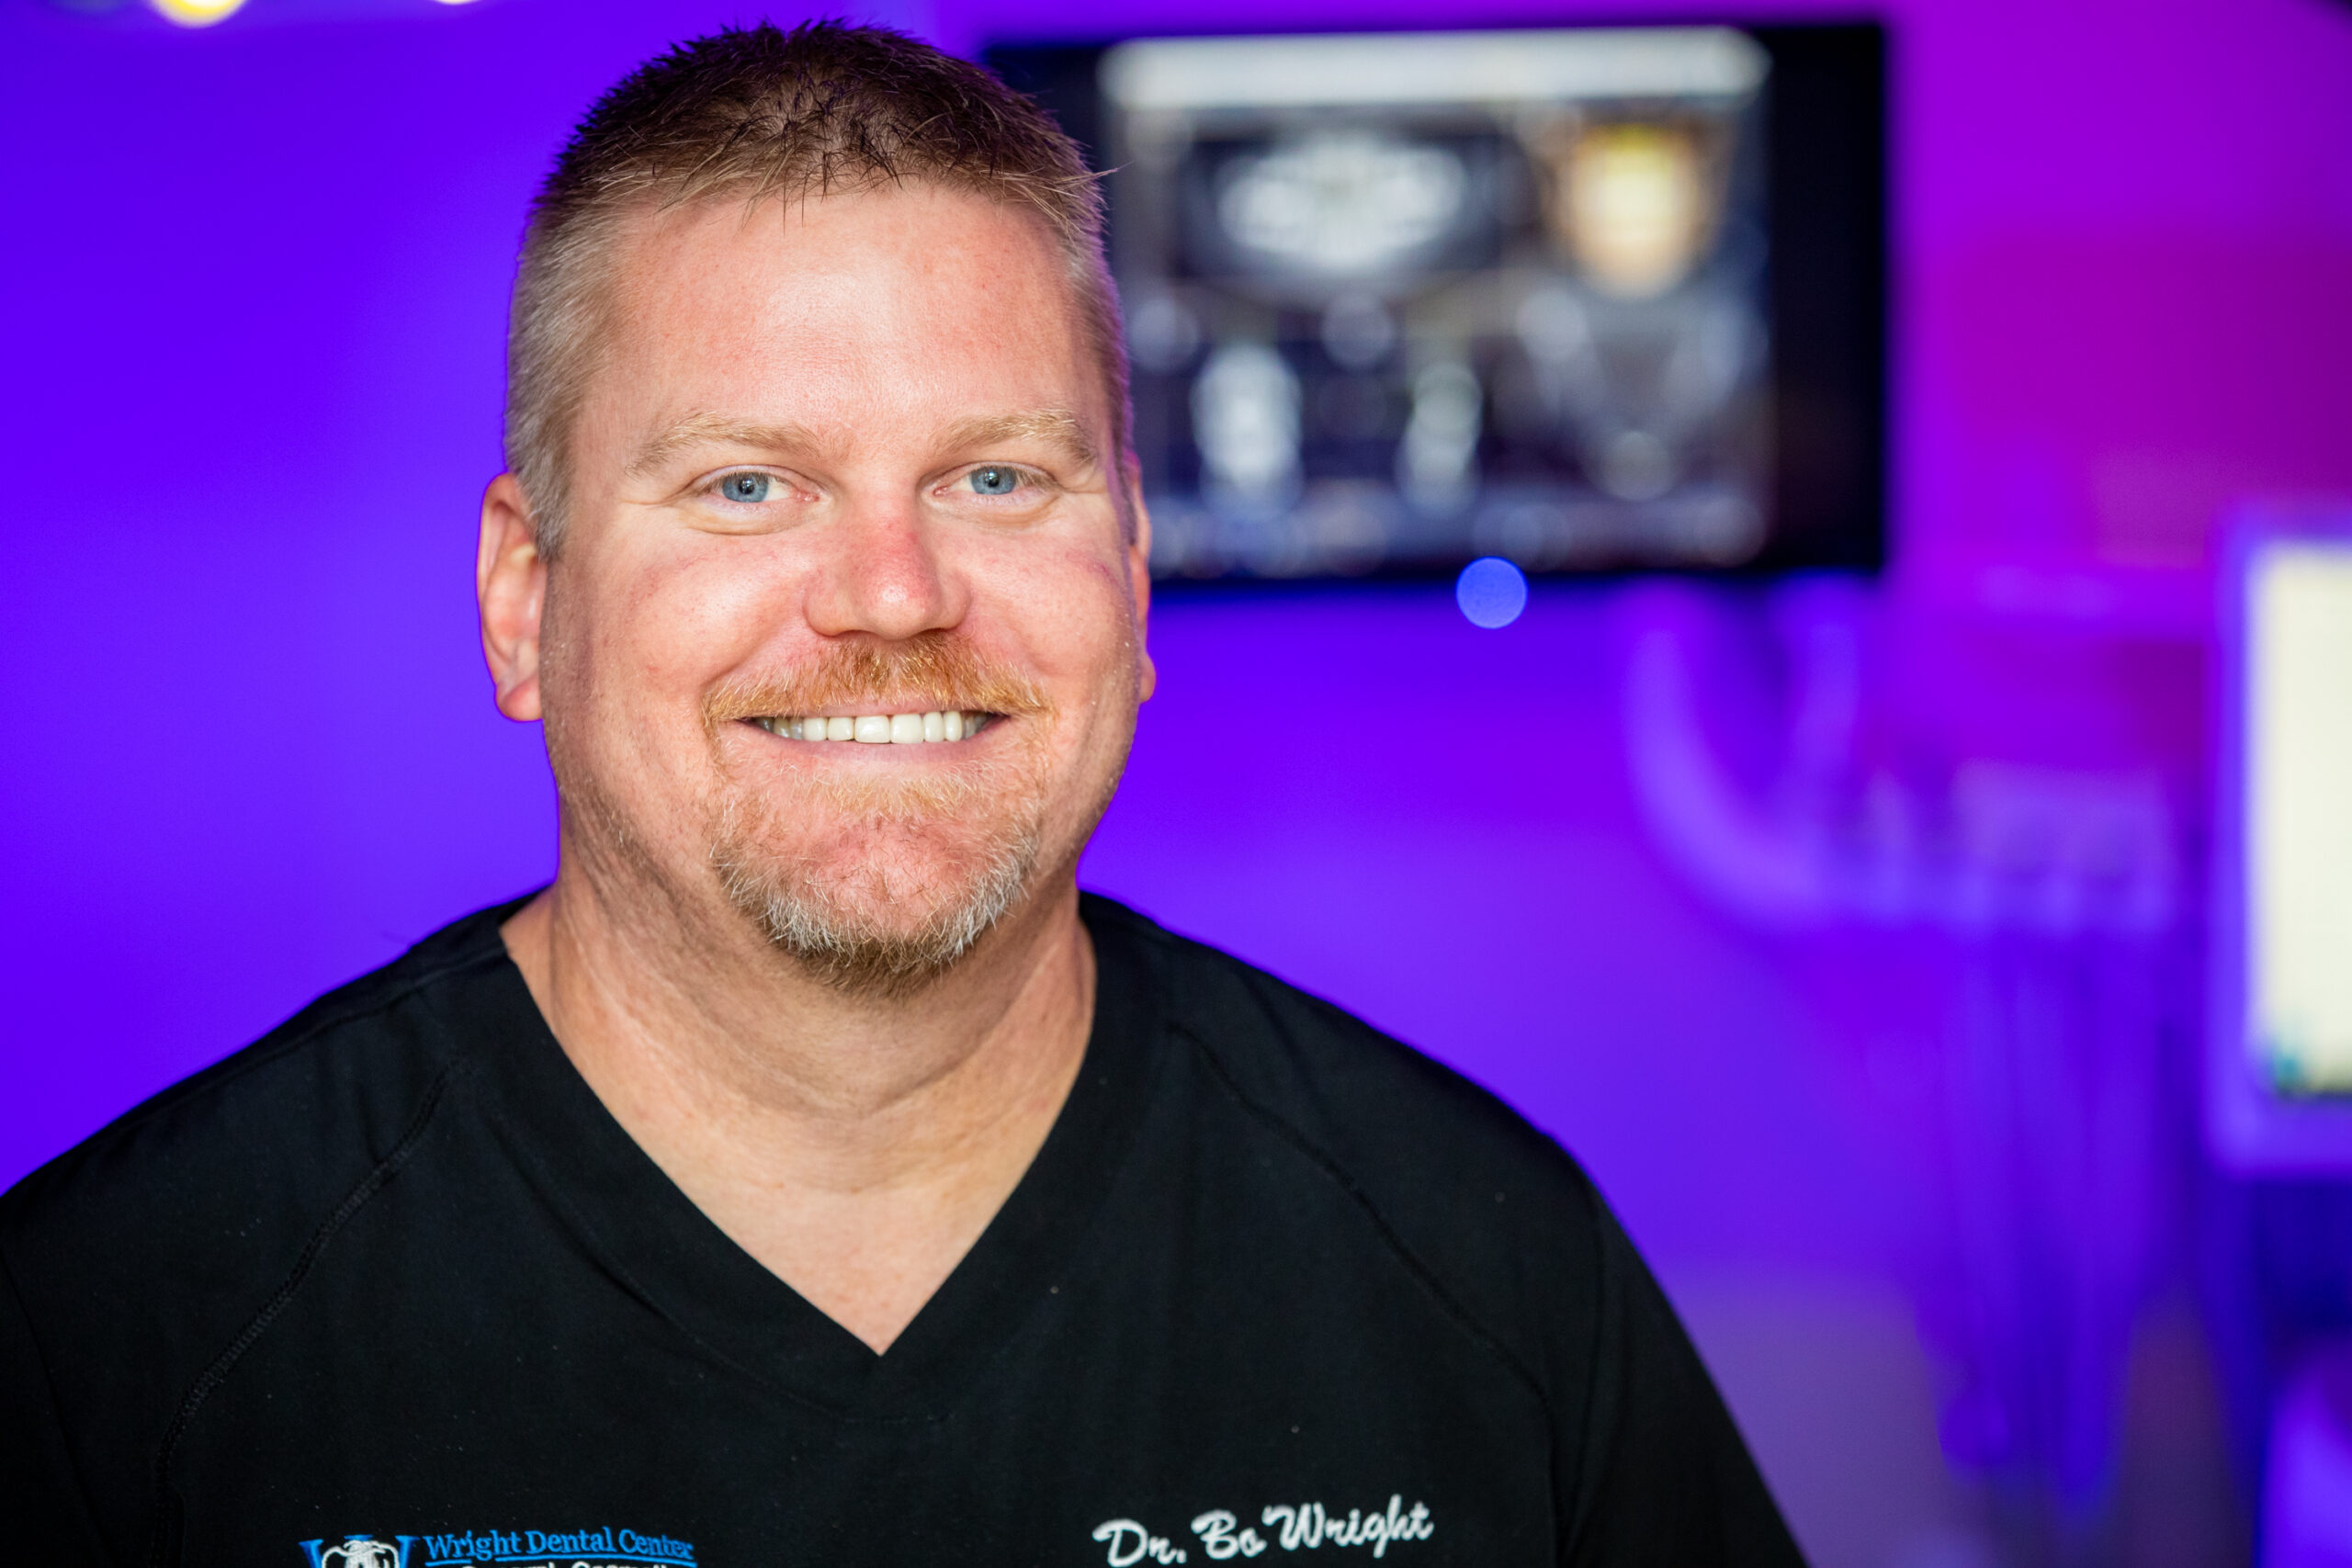 An image of Dr. James Wright of Wright Dental Center.